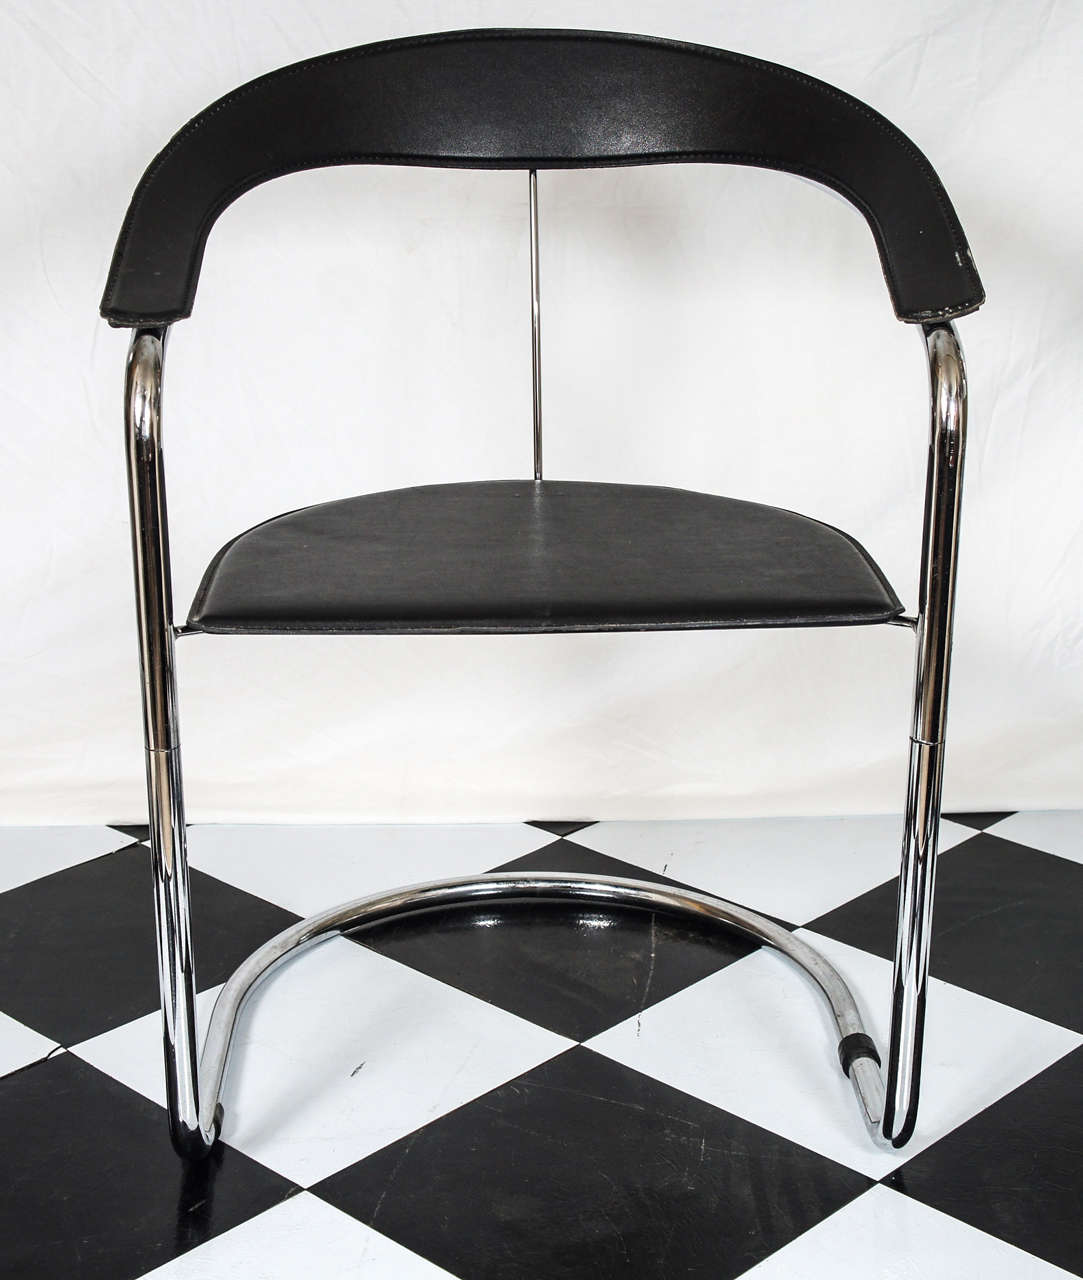 A pair of  Mid-Century Modern Fasem Chrome and Leather chairs by Giancarlo Vegni c. 1970's